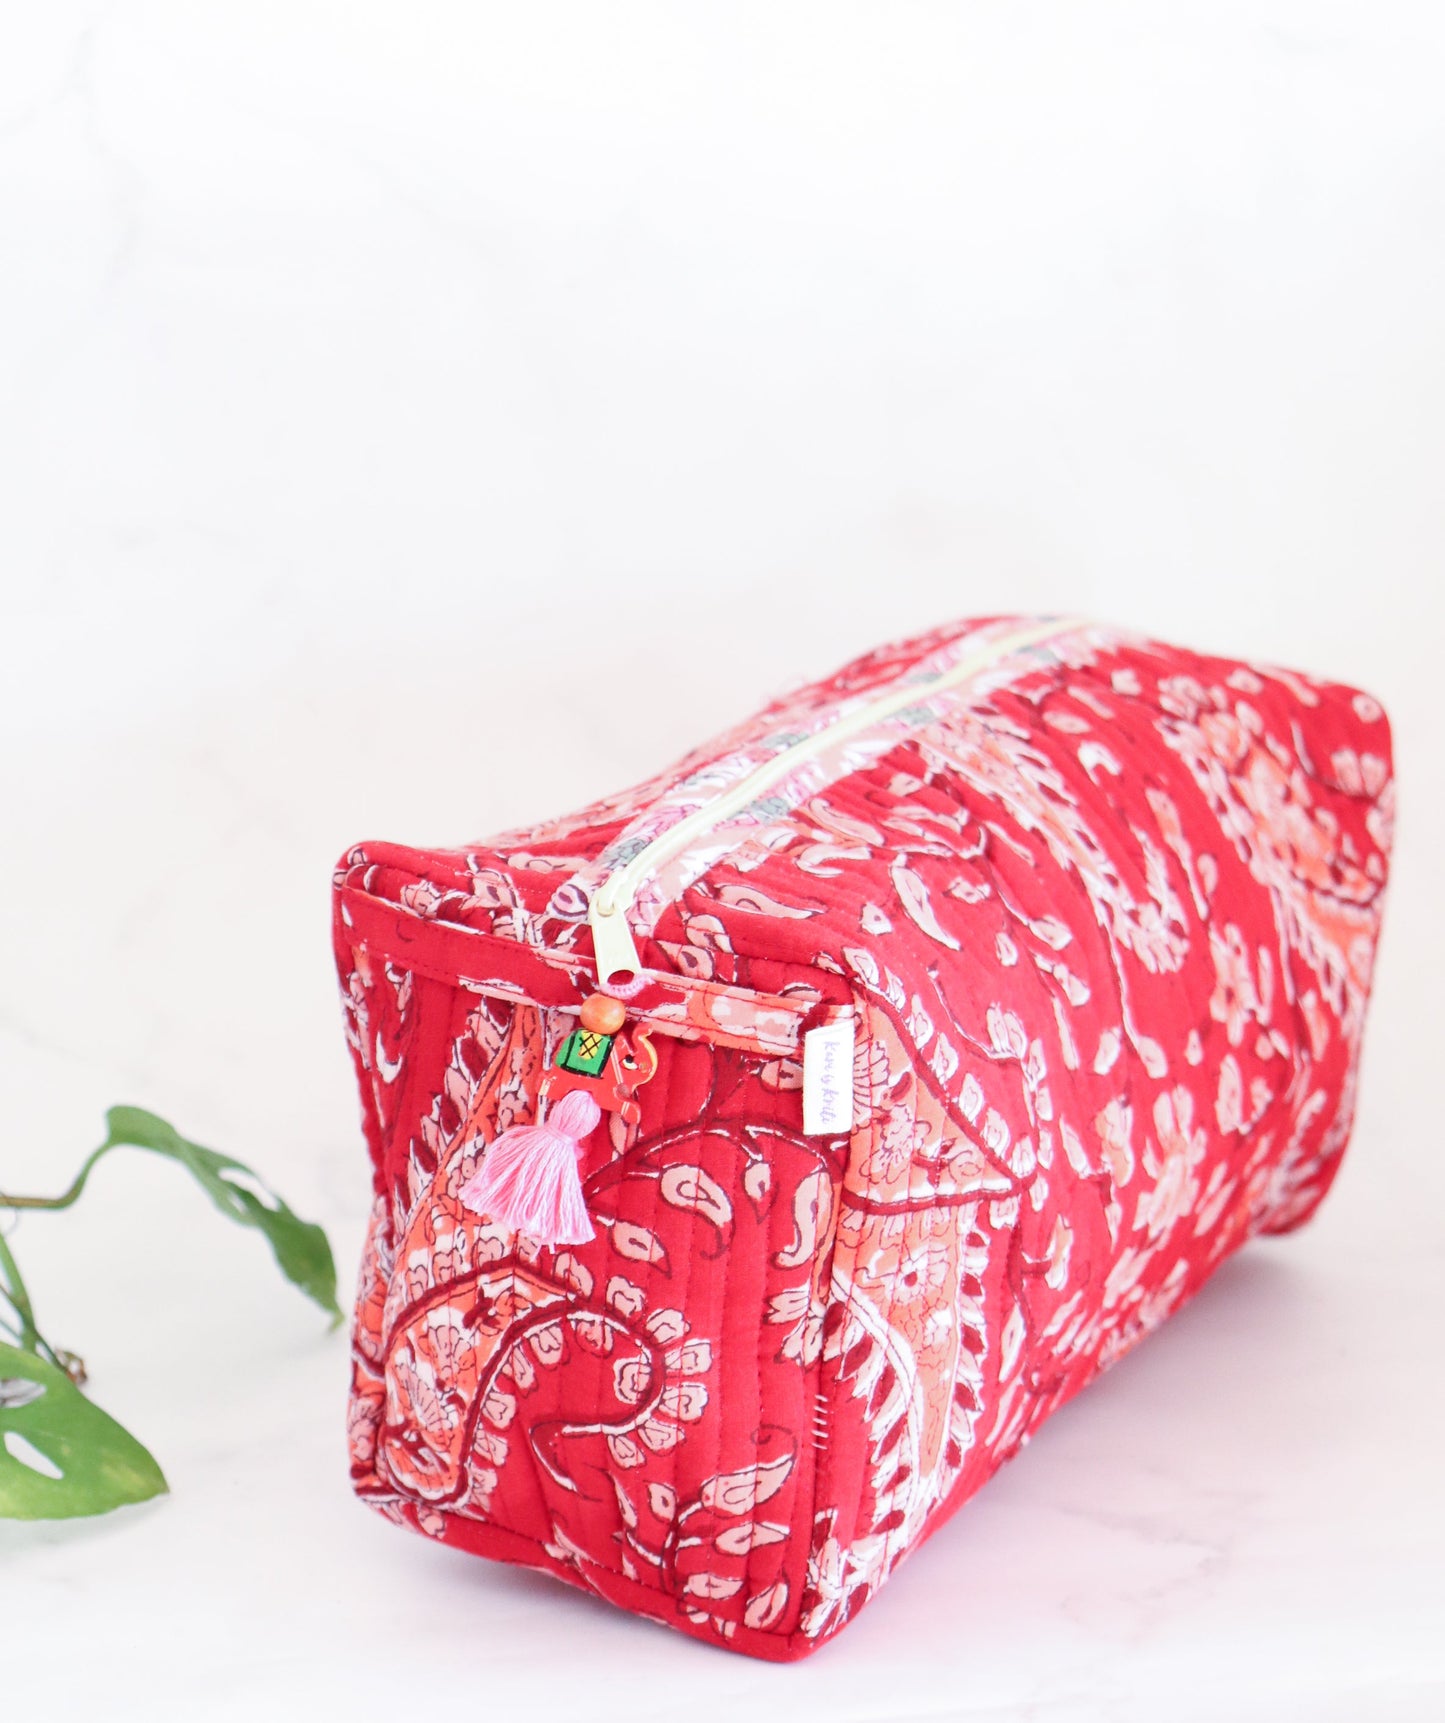 Large Cosmetic bag - Makeup bag - Block print fabric travel pouch- Red cosmetic pouch